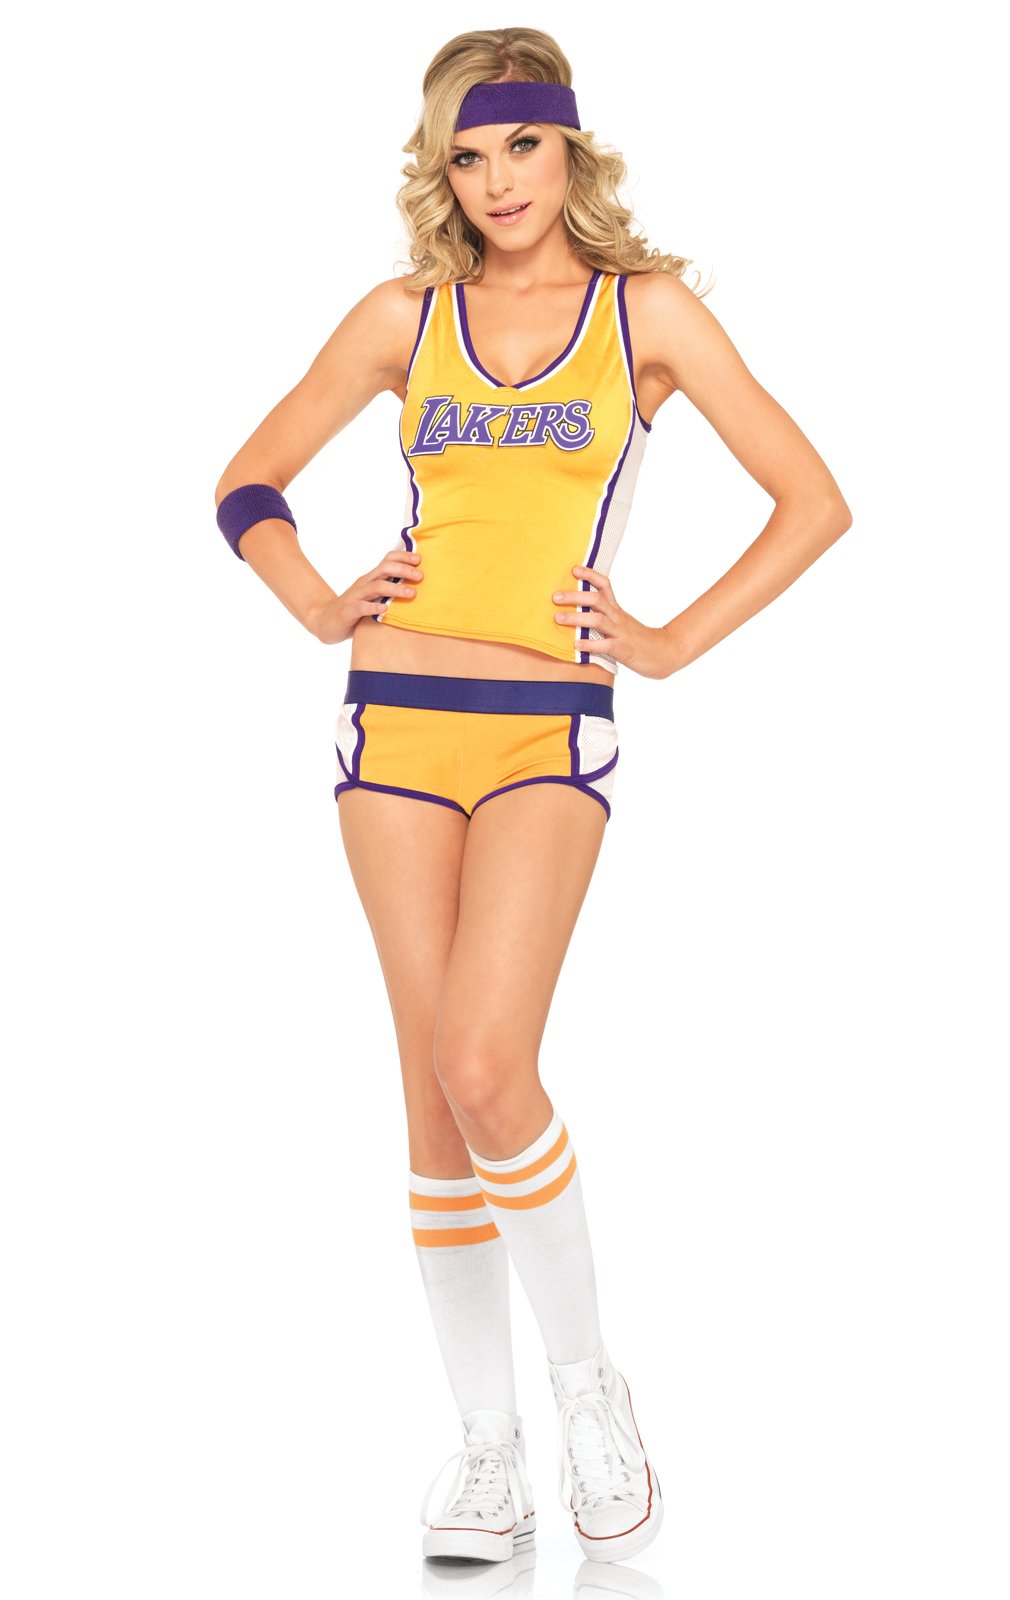 NBA Lakers Player Adult Costume